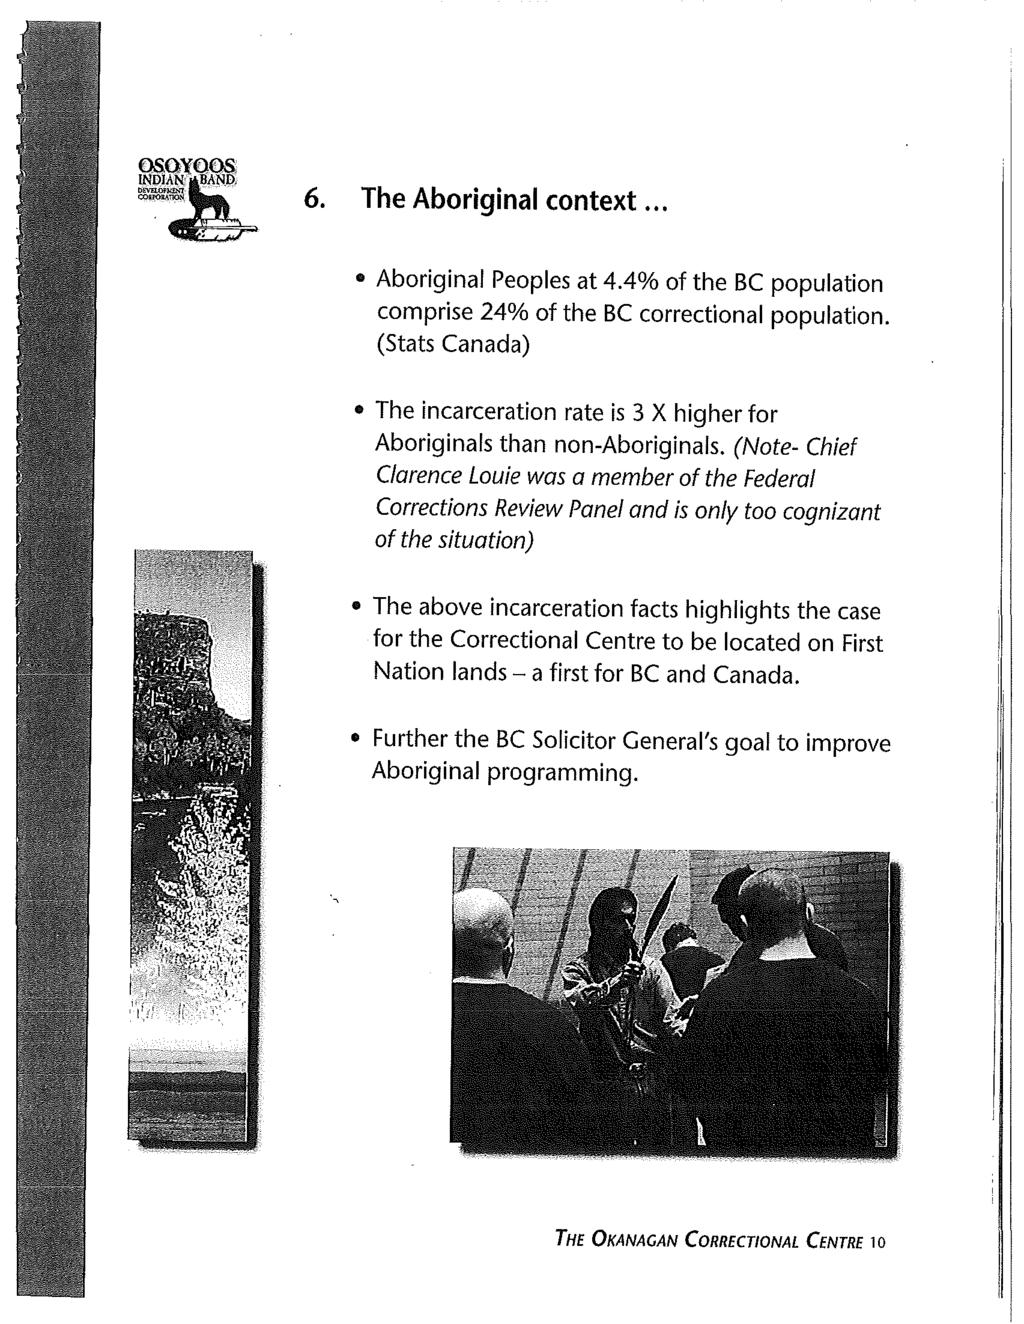 6. The Aboriginal context... Aboriginal Peoples at 4.4% of the BC population comprise 24% of the BC correctional population.